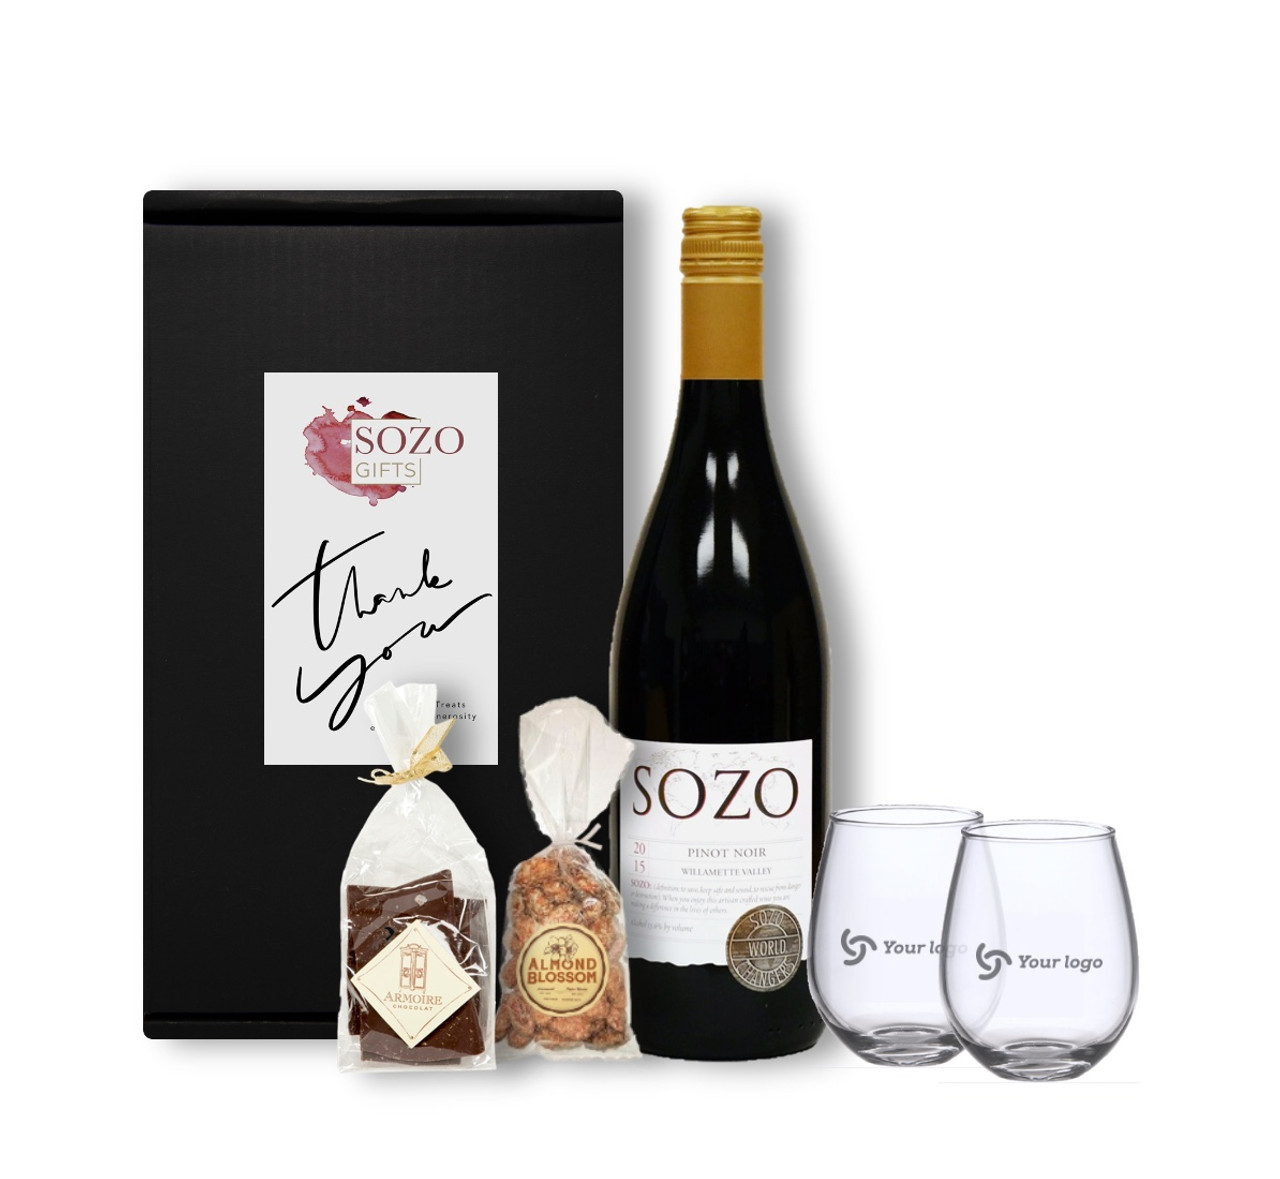 https://cdn11.bigcommerce.com/s-kgihy4hax9/images/stencil/1280x1280/products/142/841/Sozo_Pinot_Noir_Chocolate_Nuts_and_Etched_Glasses_Gift_Box__06335.1632503560.jpg?c=1